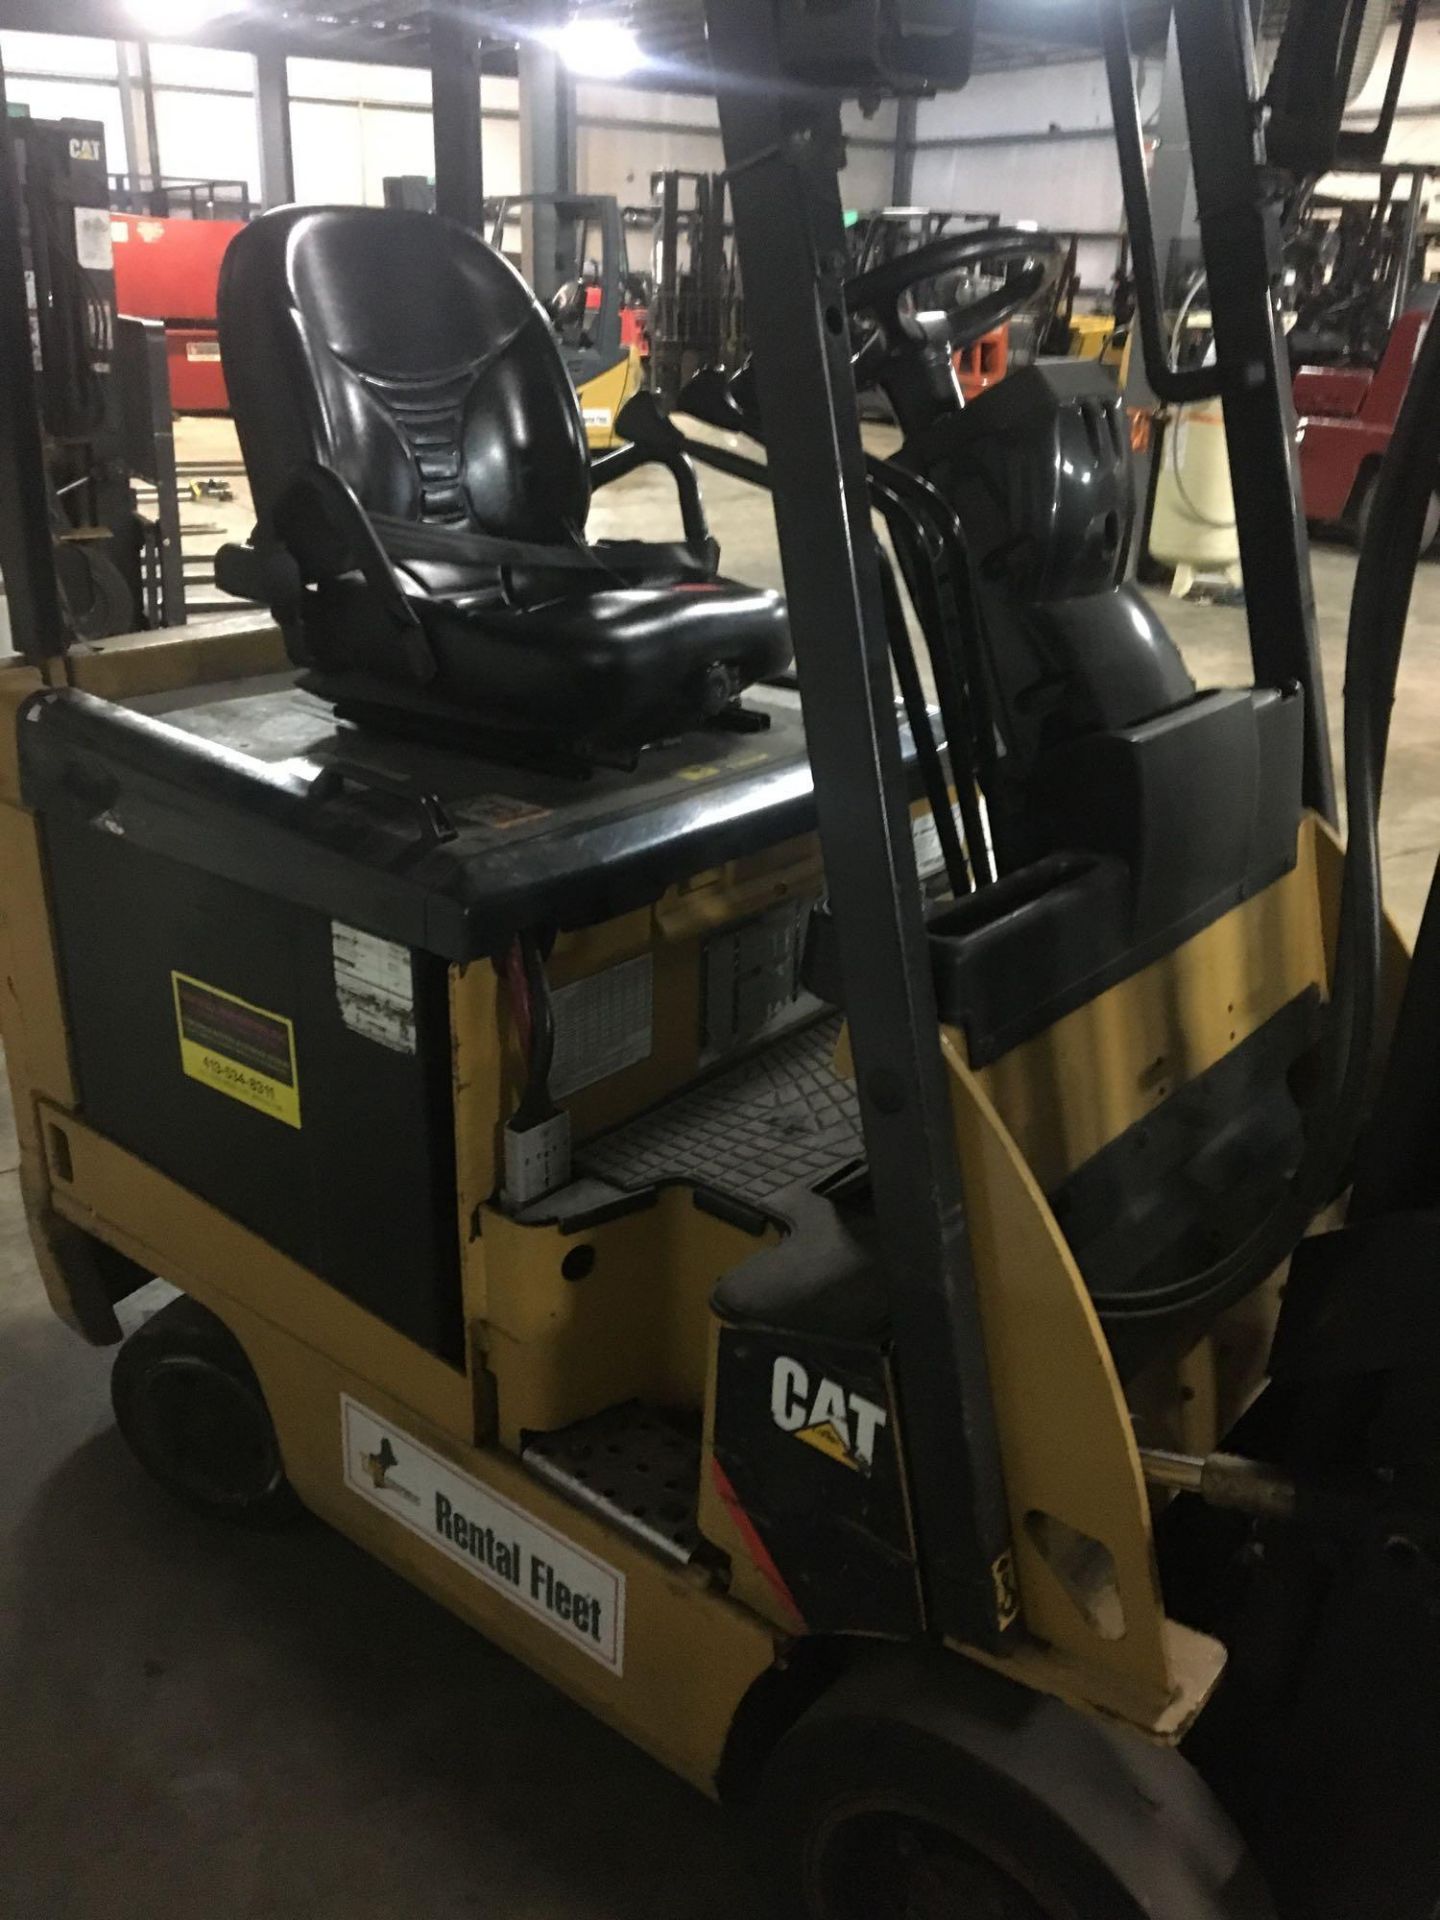 Electric Forklift, Caterpillar, E3000, Max Ht 188, Max Cap 2600lbs, Hrs 5032 Started and Moved - Image 6 of 8